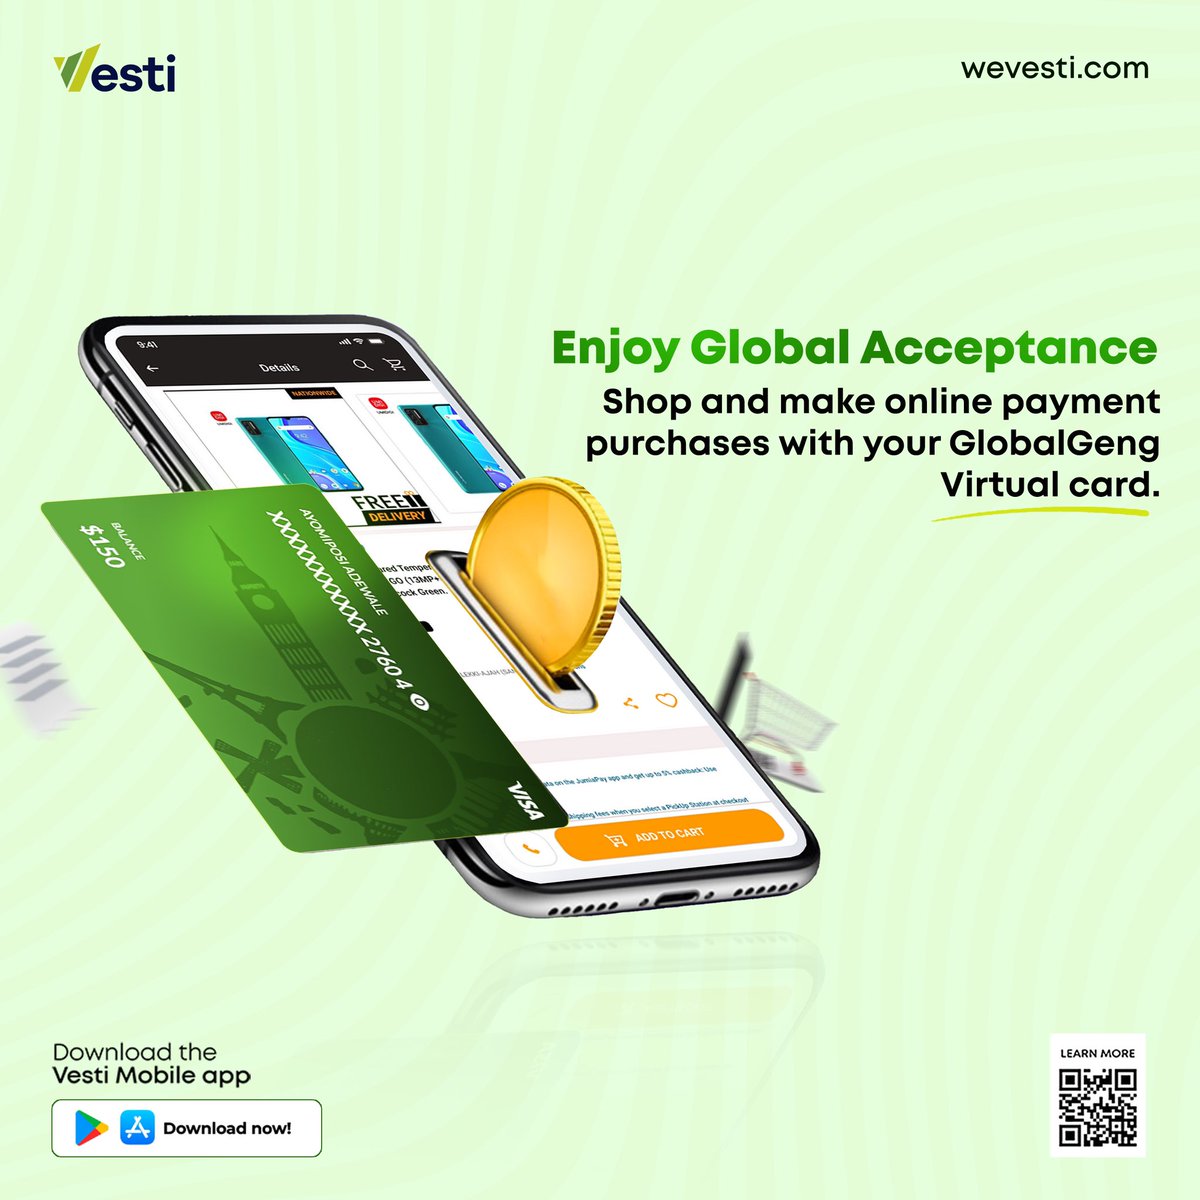 Celebrate your hustle this #InternationalWorkersDay with the freedom to send and spend globally!

The Vesti GlobalGeng Virtual Dollar Card lets you manage your finances seamlessly, no matter where work takes you.

#GlobalGeng #VirtualCard #WorkRemote #InternationalPayments